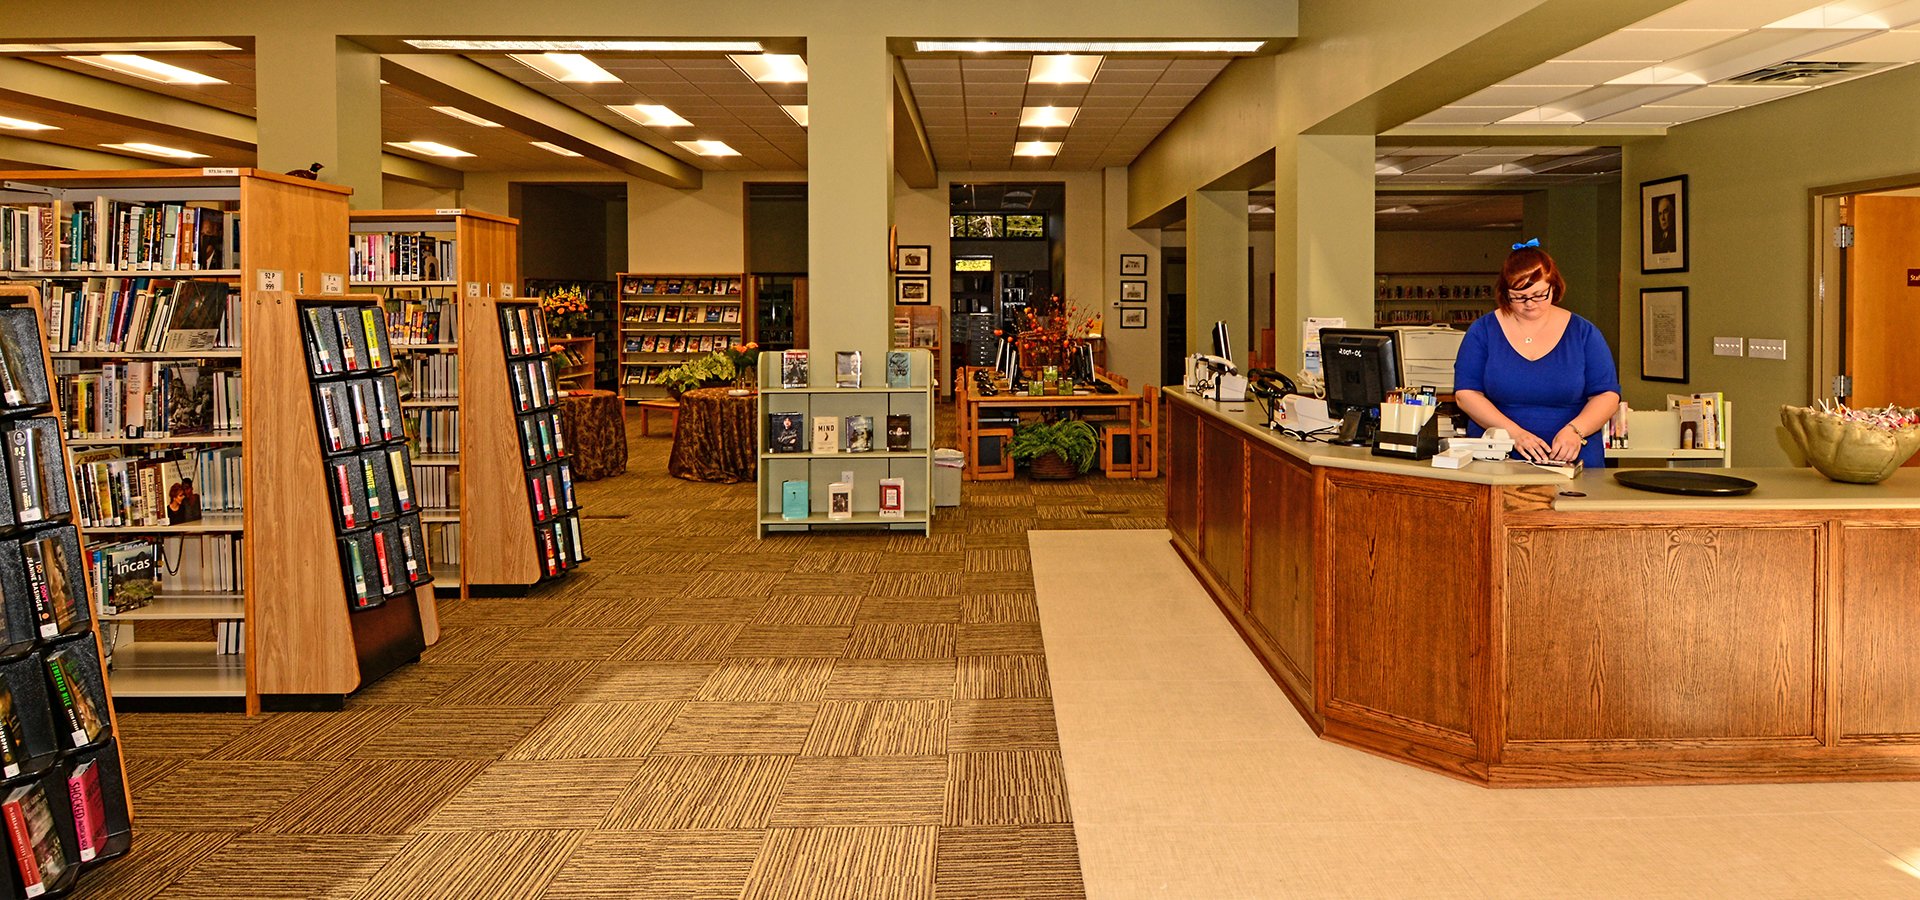 Giles County Library | Pulaski, Tennessee